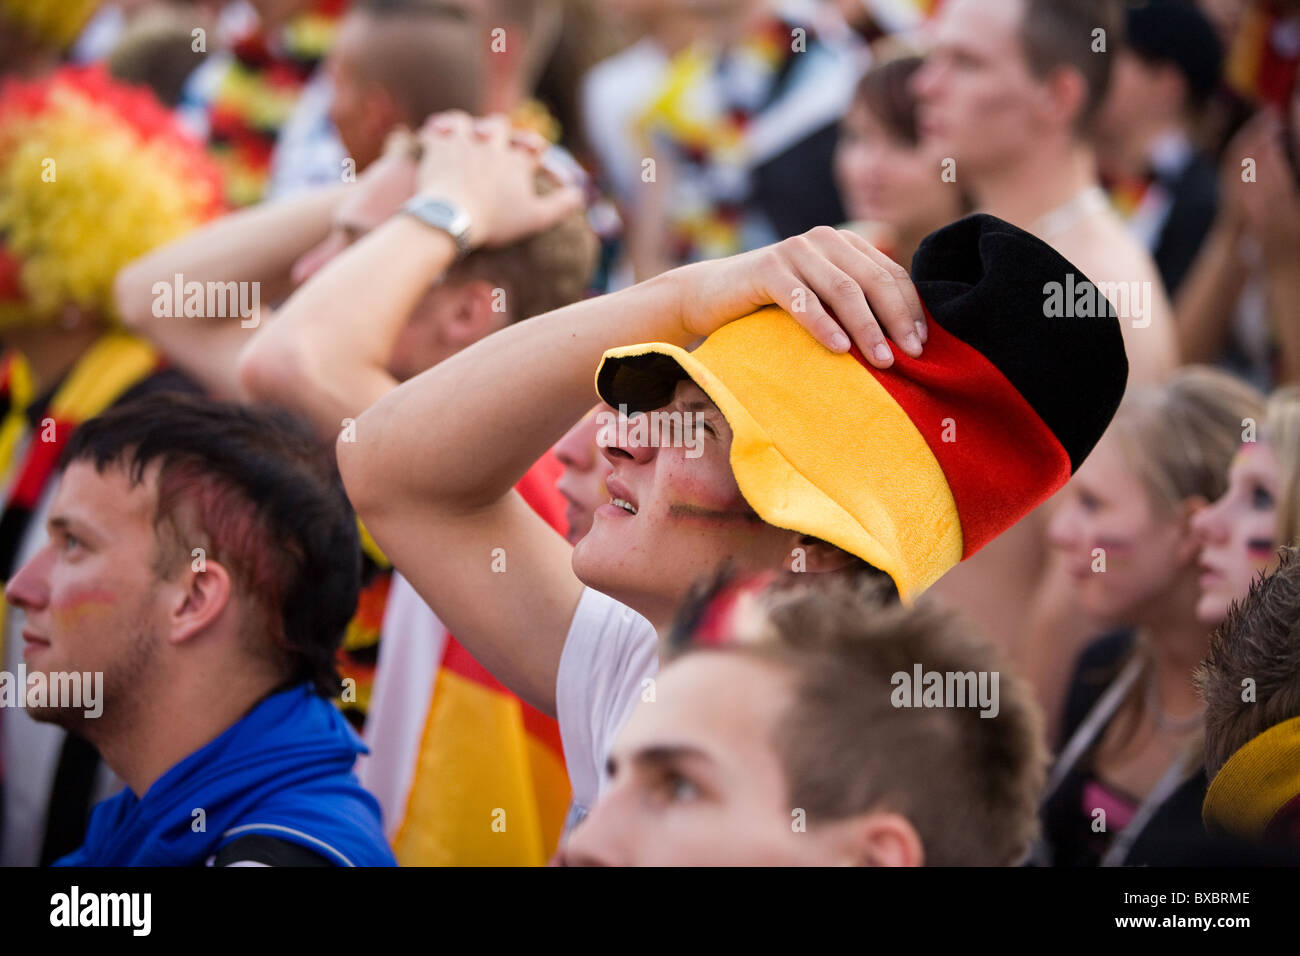 Football fans during the final of the European Championship, Berlin, Germany Stock Photo